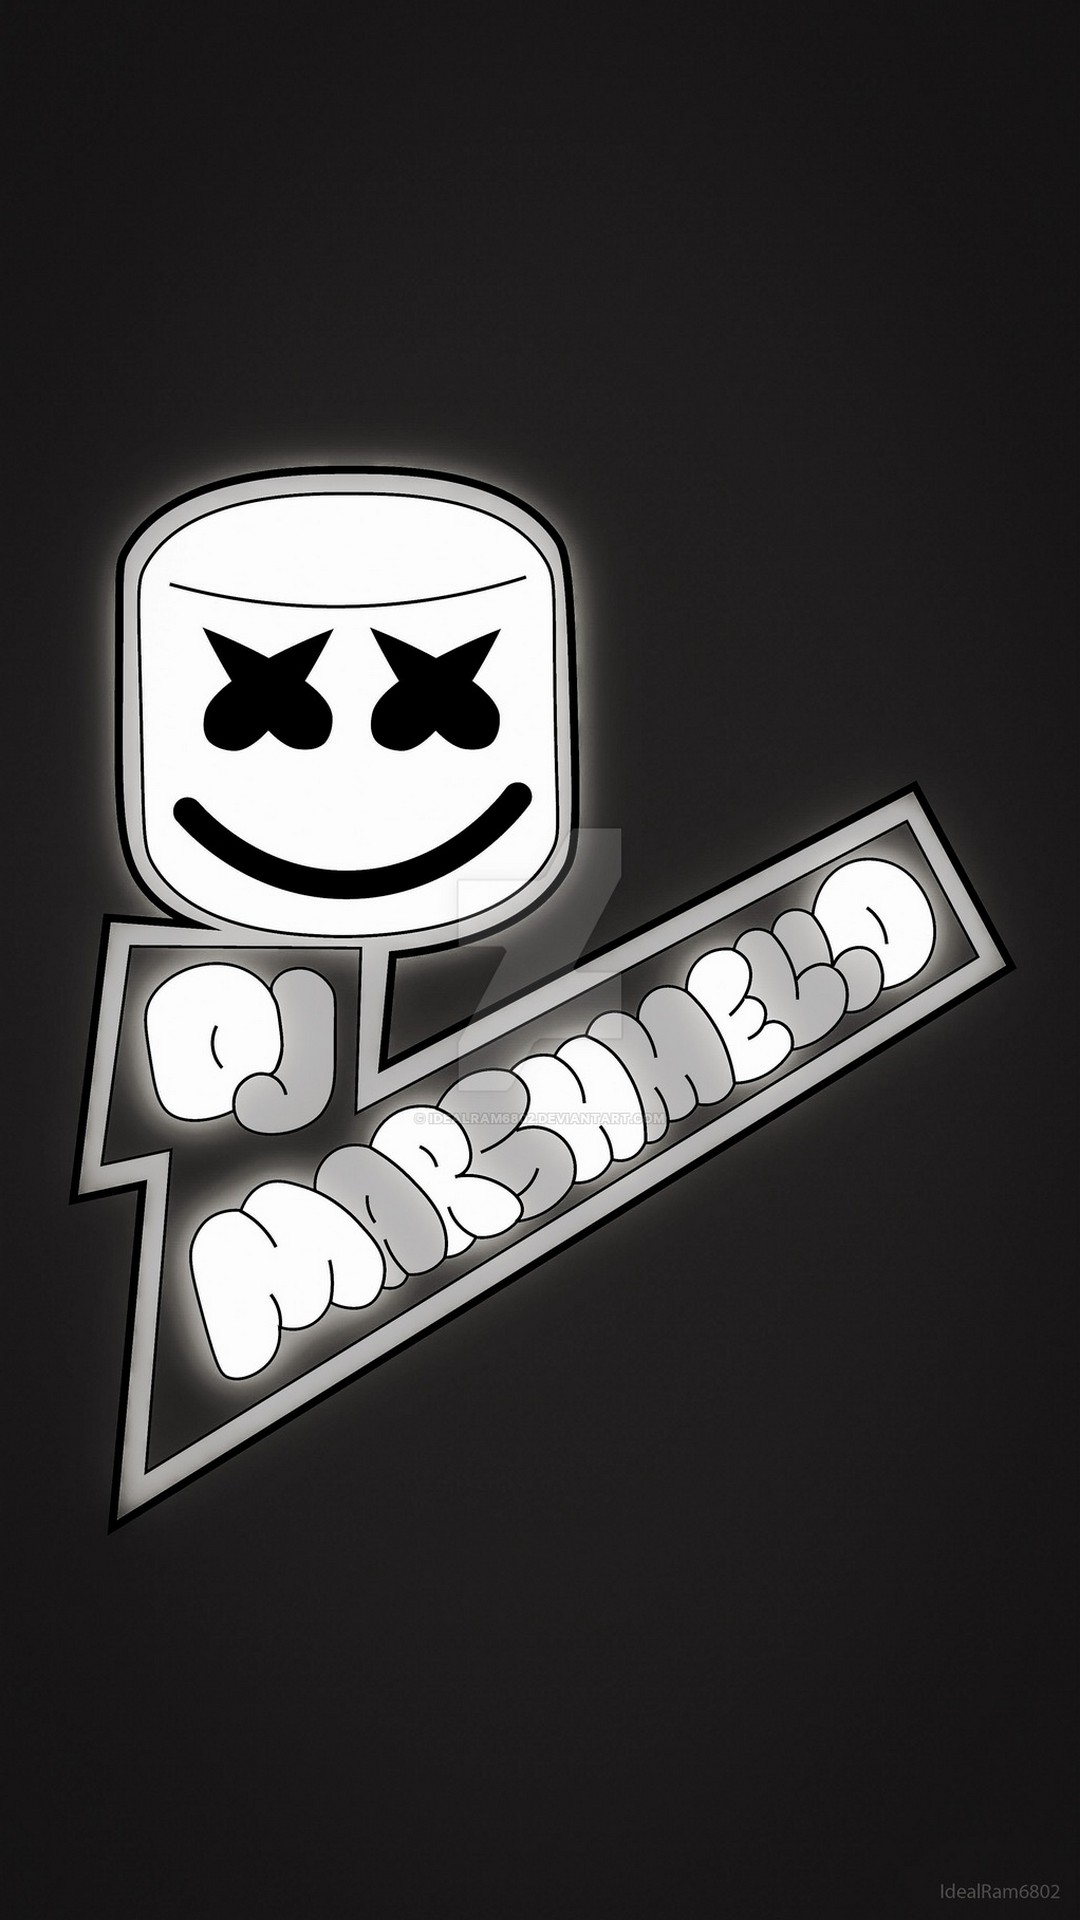 Wallpaper Android Marshmello With high-resolution 1080X1920 pixel. You can use this wallpaper for your Android backgrounds, Tablet, Samsung Screensavers, Mobile Phone Lock Screen and another Smartphones device